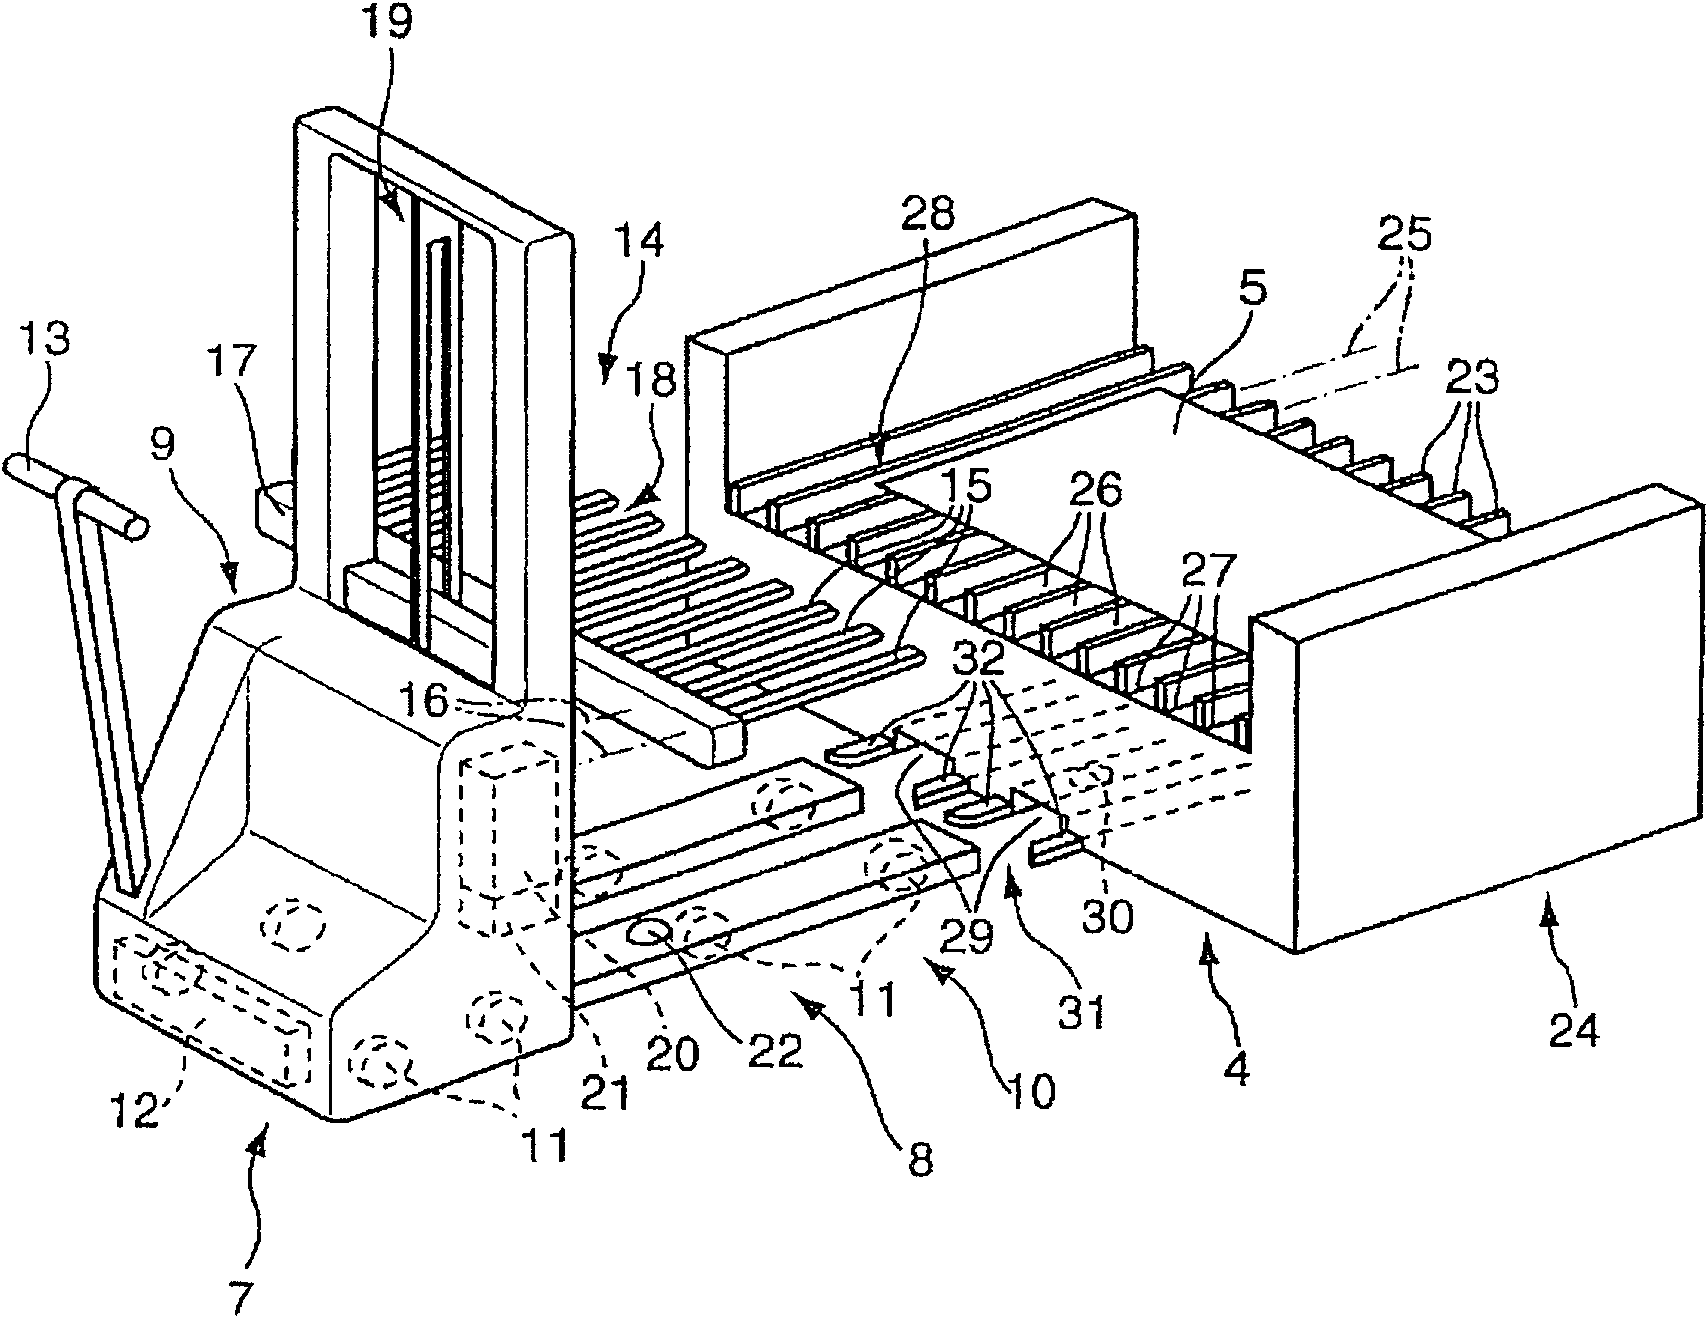 Mechanical device for conveying workpieces of machine tool, pavement conveying device and method, and workpiece support used for machine tool